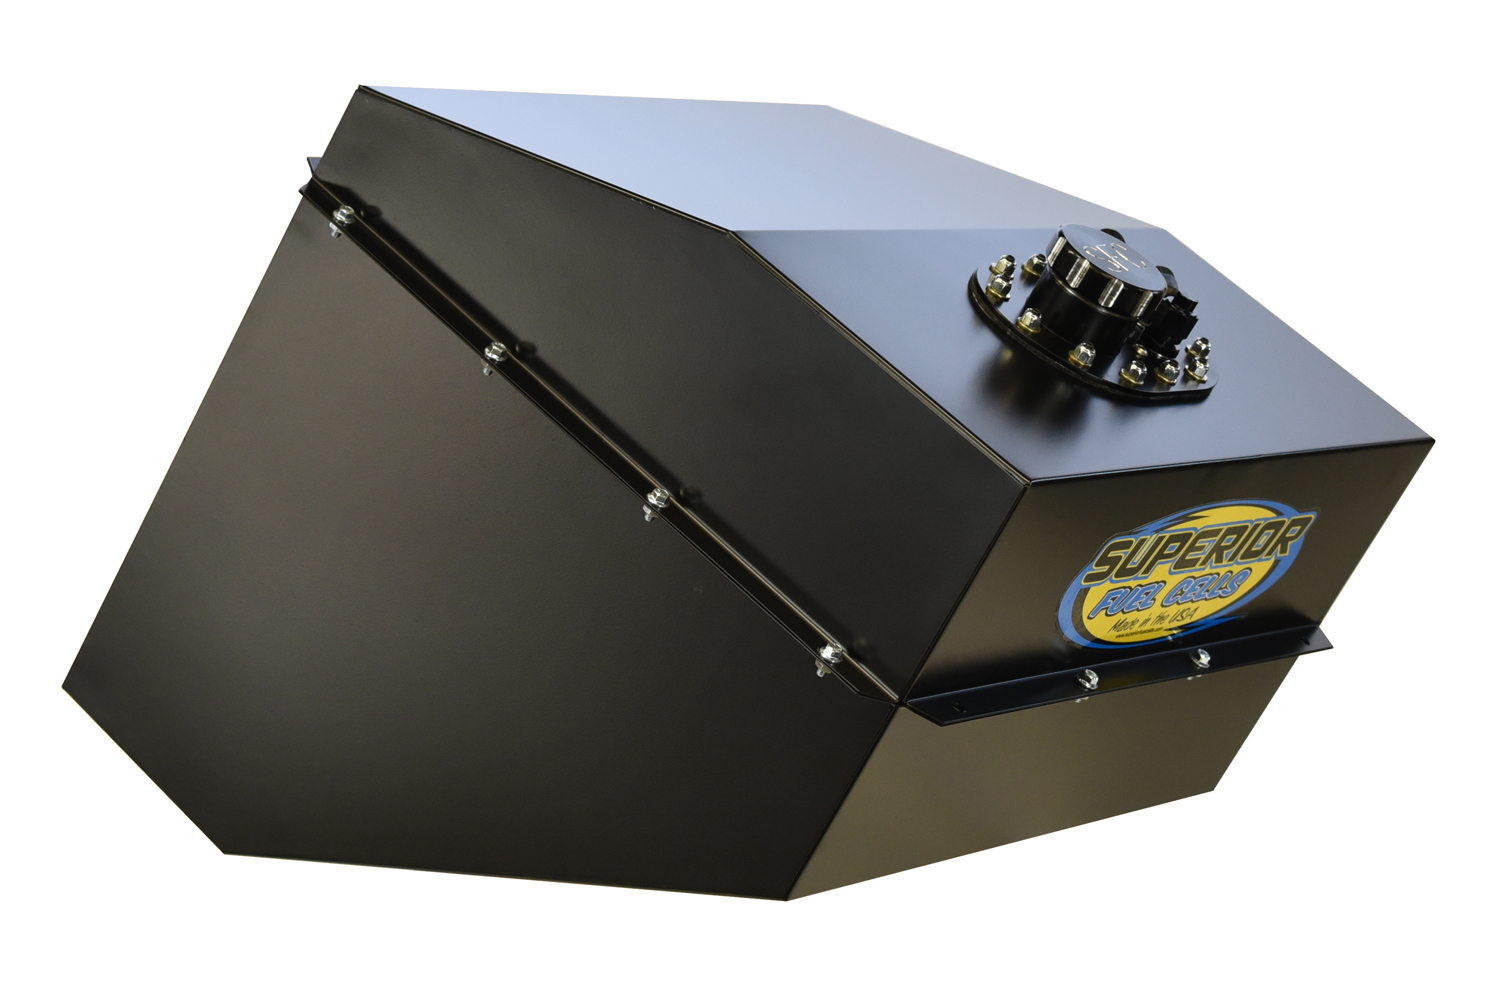 Superior Fuel Cells SFC26TF-BL-SFI - Fuel Cell and Can, 26 gal, SFI, 20-3/4 in Deep x 19-1/2 in Wide, 10 AN Male Outlet, 8 AN Male Return, 6 AN Rollover Valve, Foam, Steel, Black Powder Coat, Dirt Late Model / Modified, Each